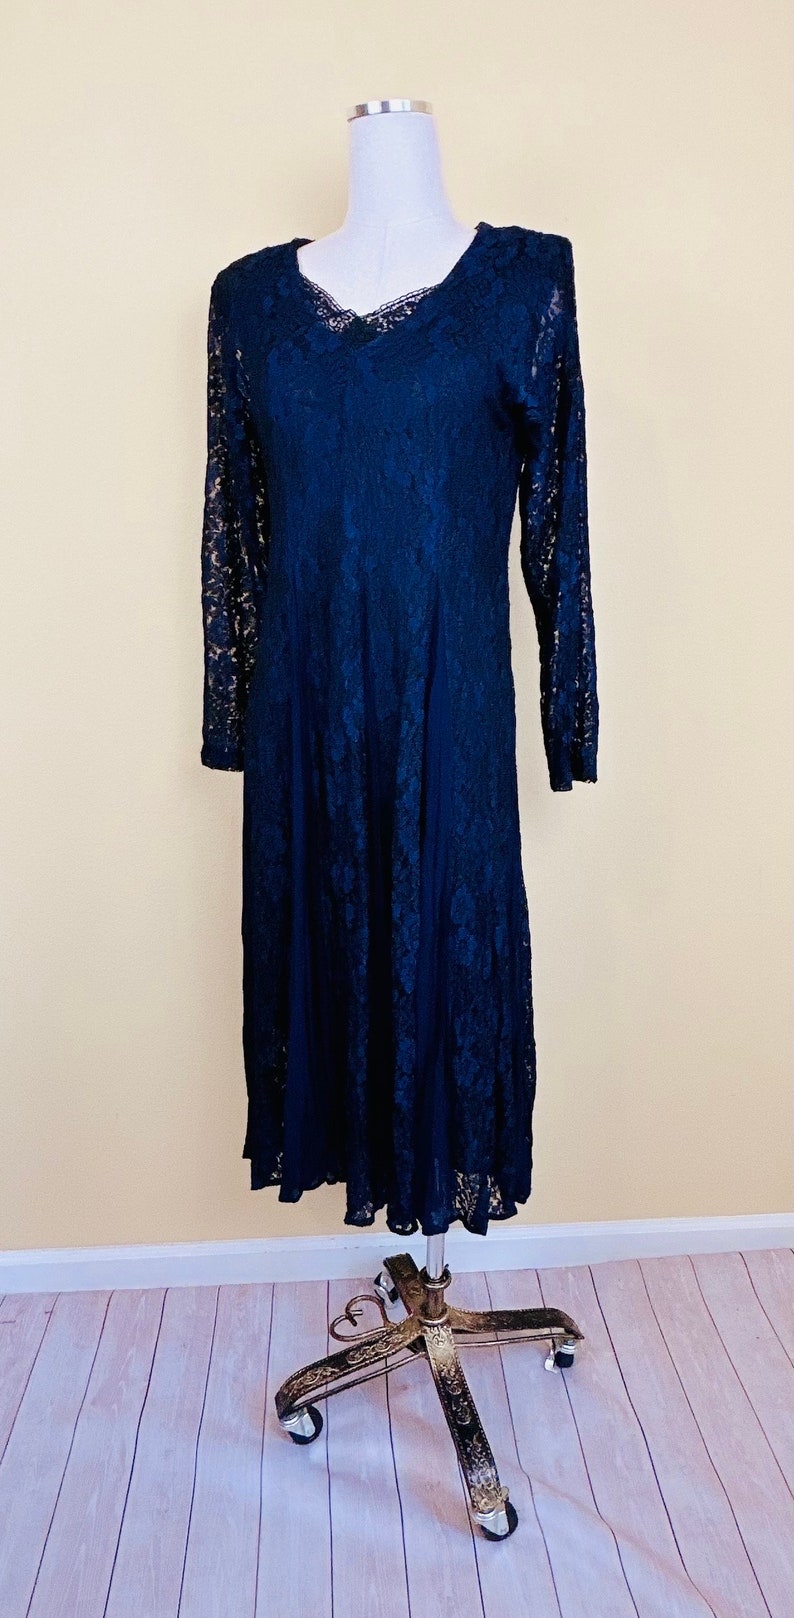 1990s Vintage Nostalgia Rayon Lace Dress / 90s Grunge Sheer Floral Navy Blue and Black Midi Dress / Size Small Medium image 3